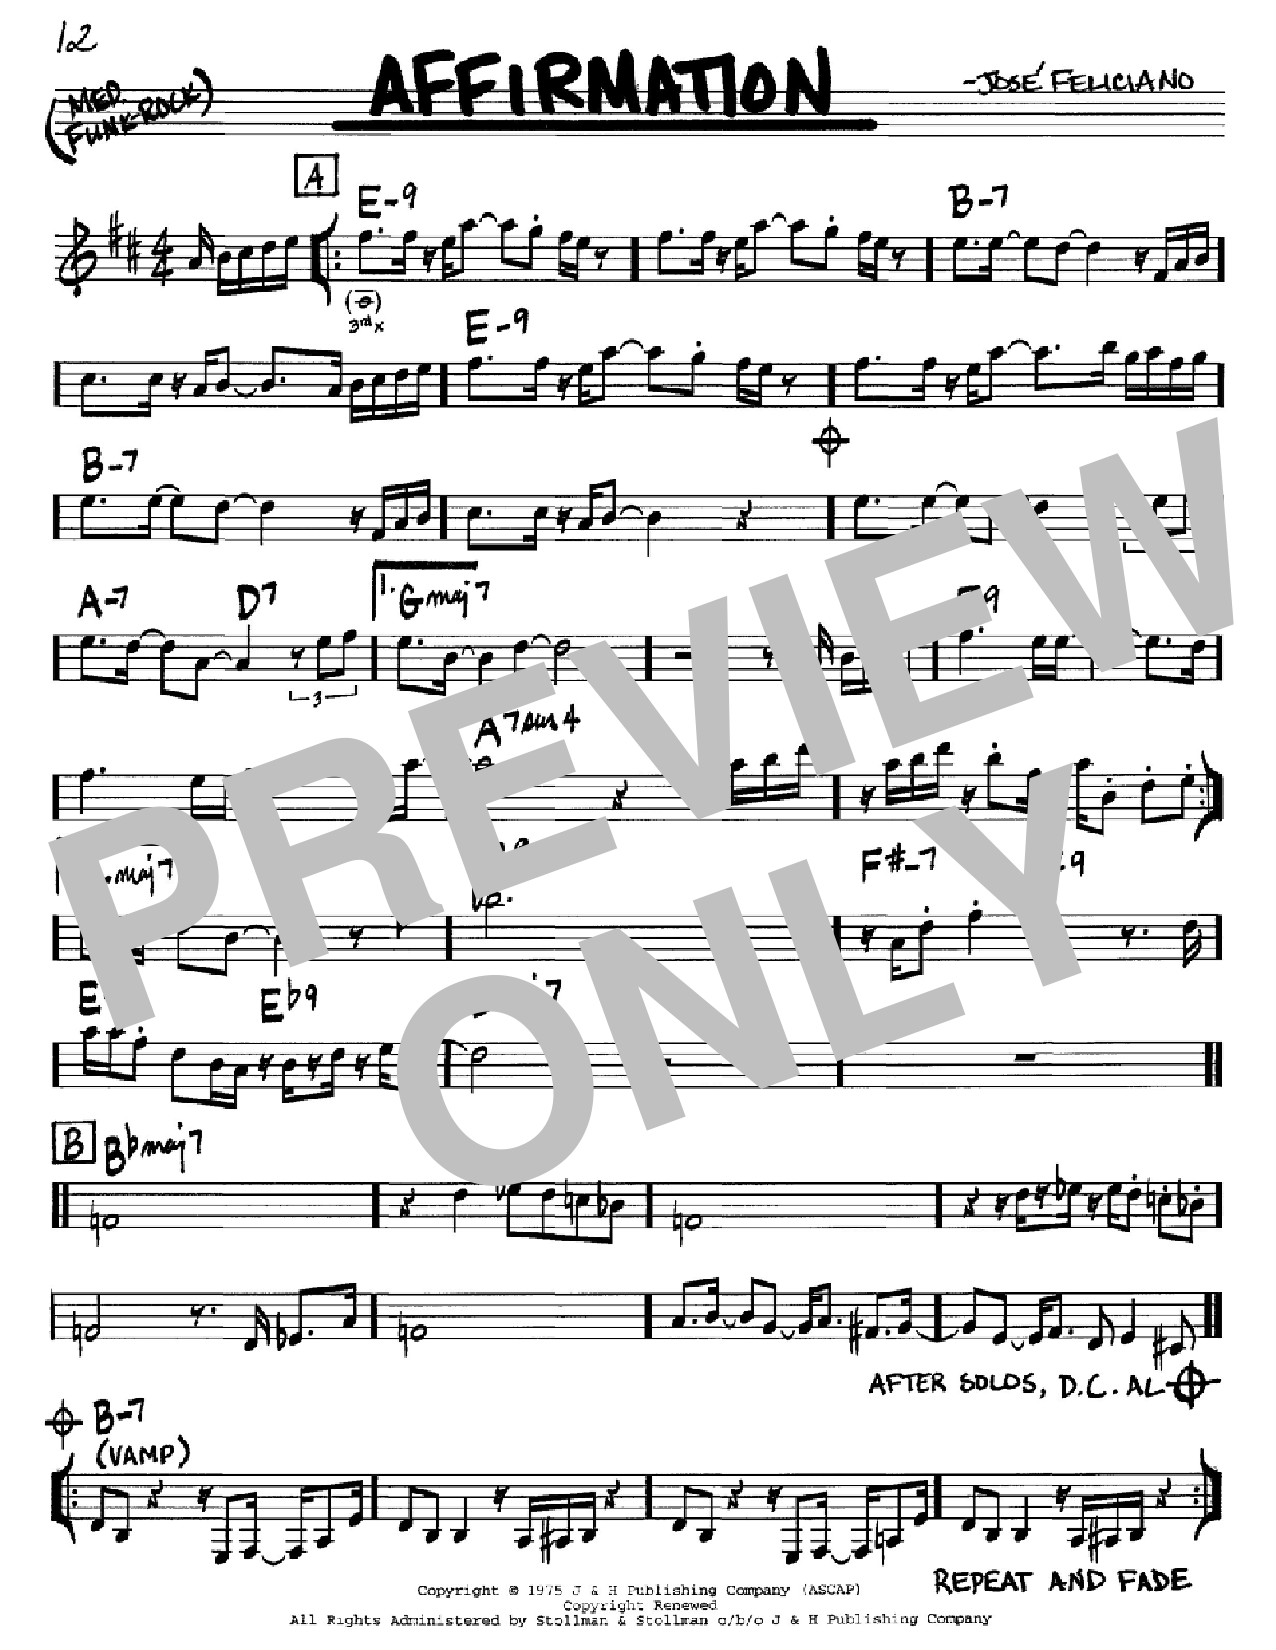 Download Jose Feliciano Affirmation Sheet Music